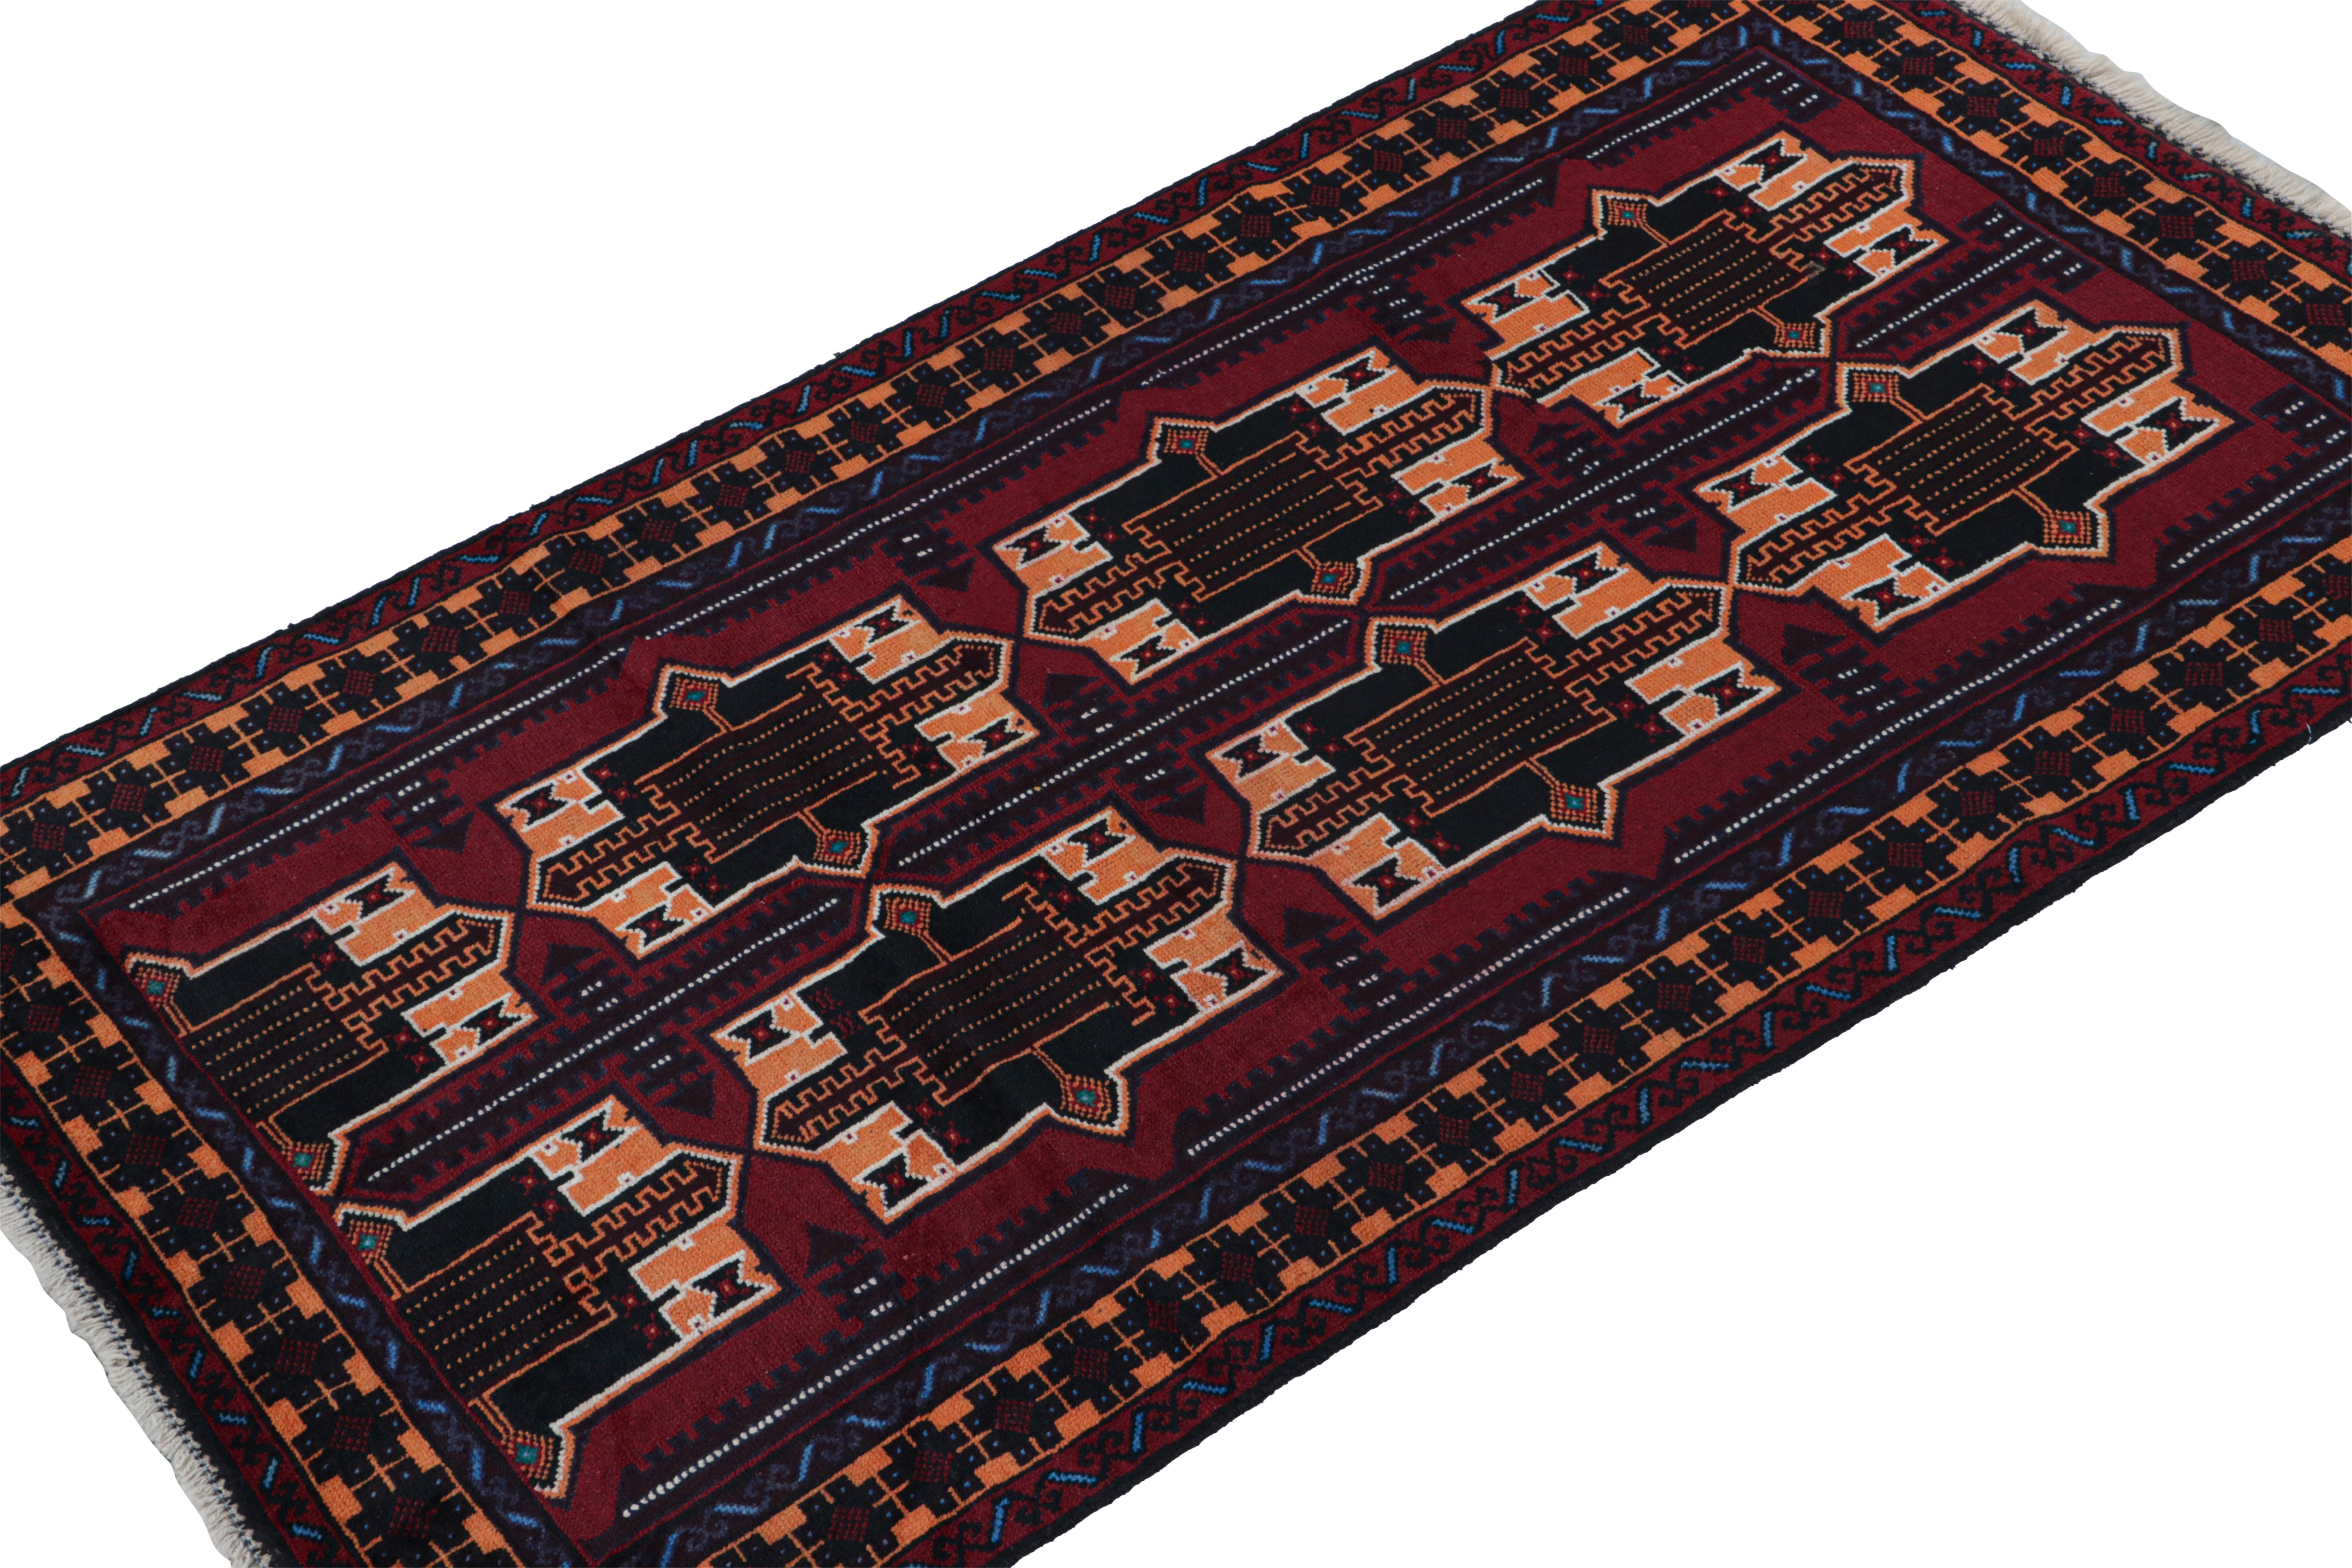 Hand-knotted in wool & goat hair circa 1950-1960, this 3x6 vintage Baluch runner rug is an exciting new tribal curation from Rug & Kilim. 

On the Design: 

This piece enjoys an unusual, bright orange accent among the more traditional burgundy, navy